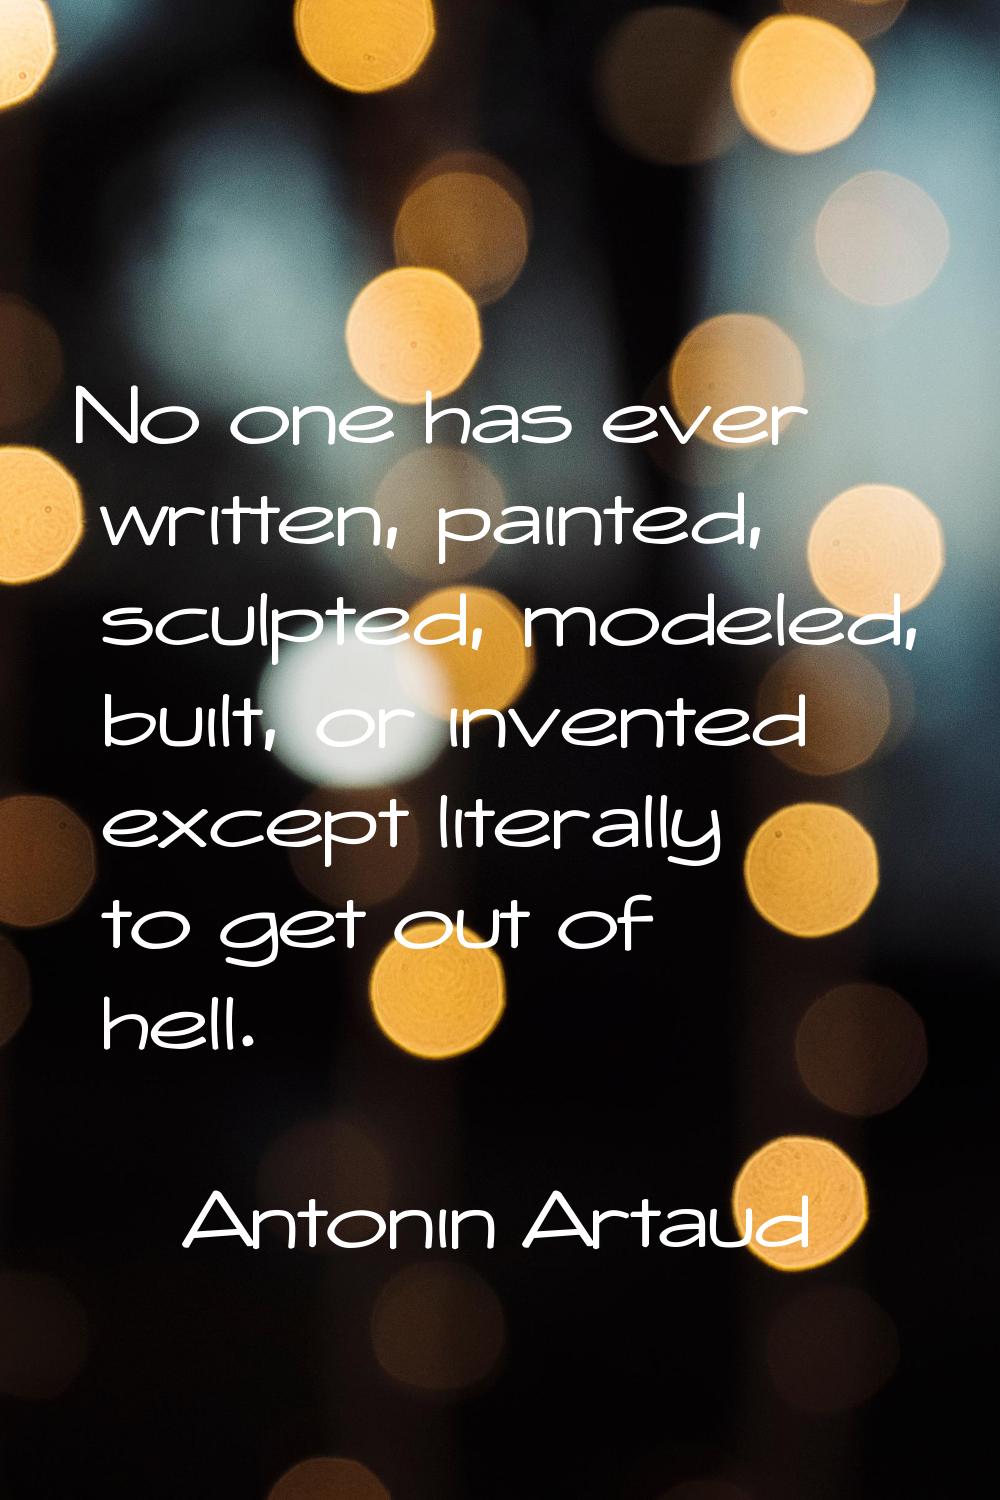 No one has ever written, painted, sculpted, modeled, built, or invented except literally to get out